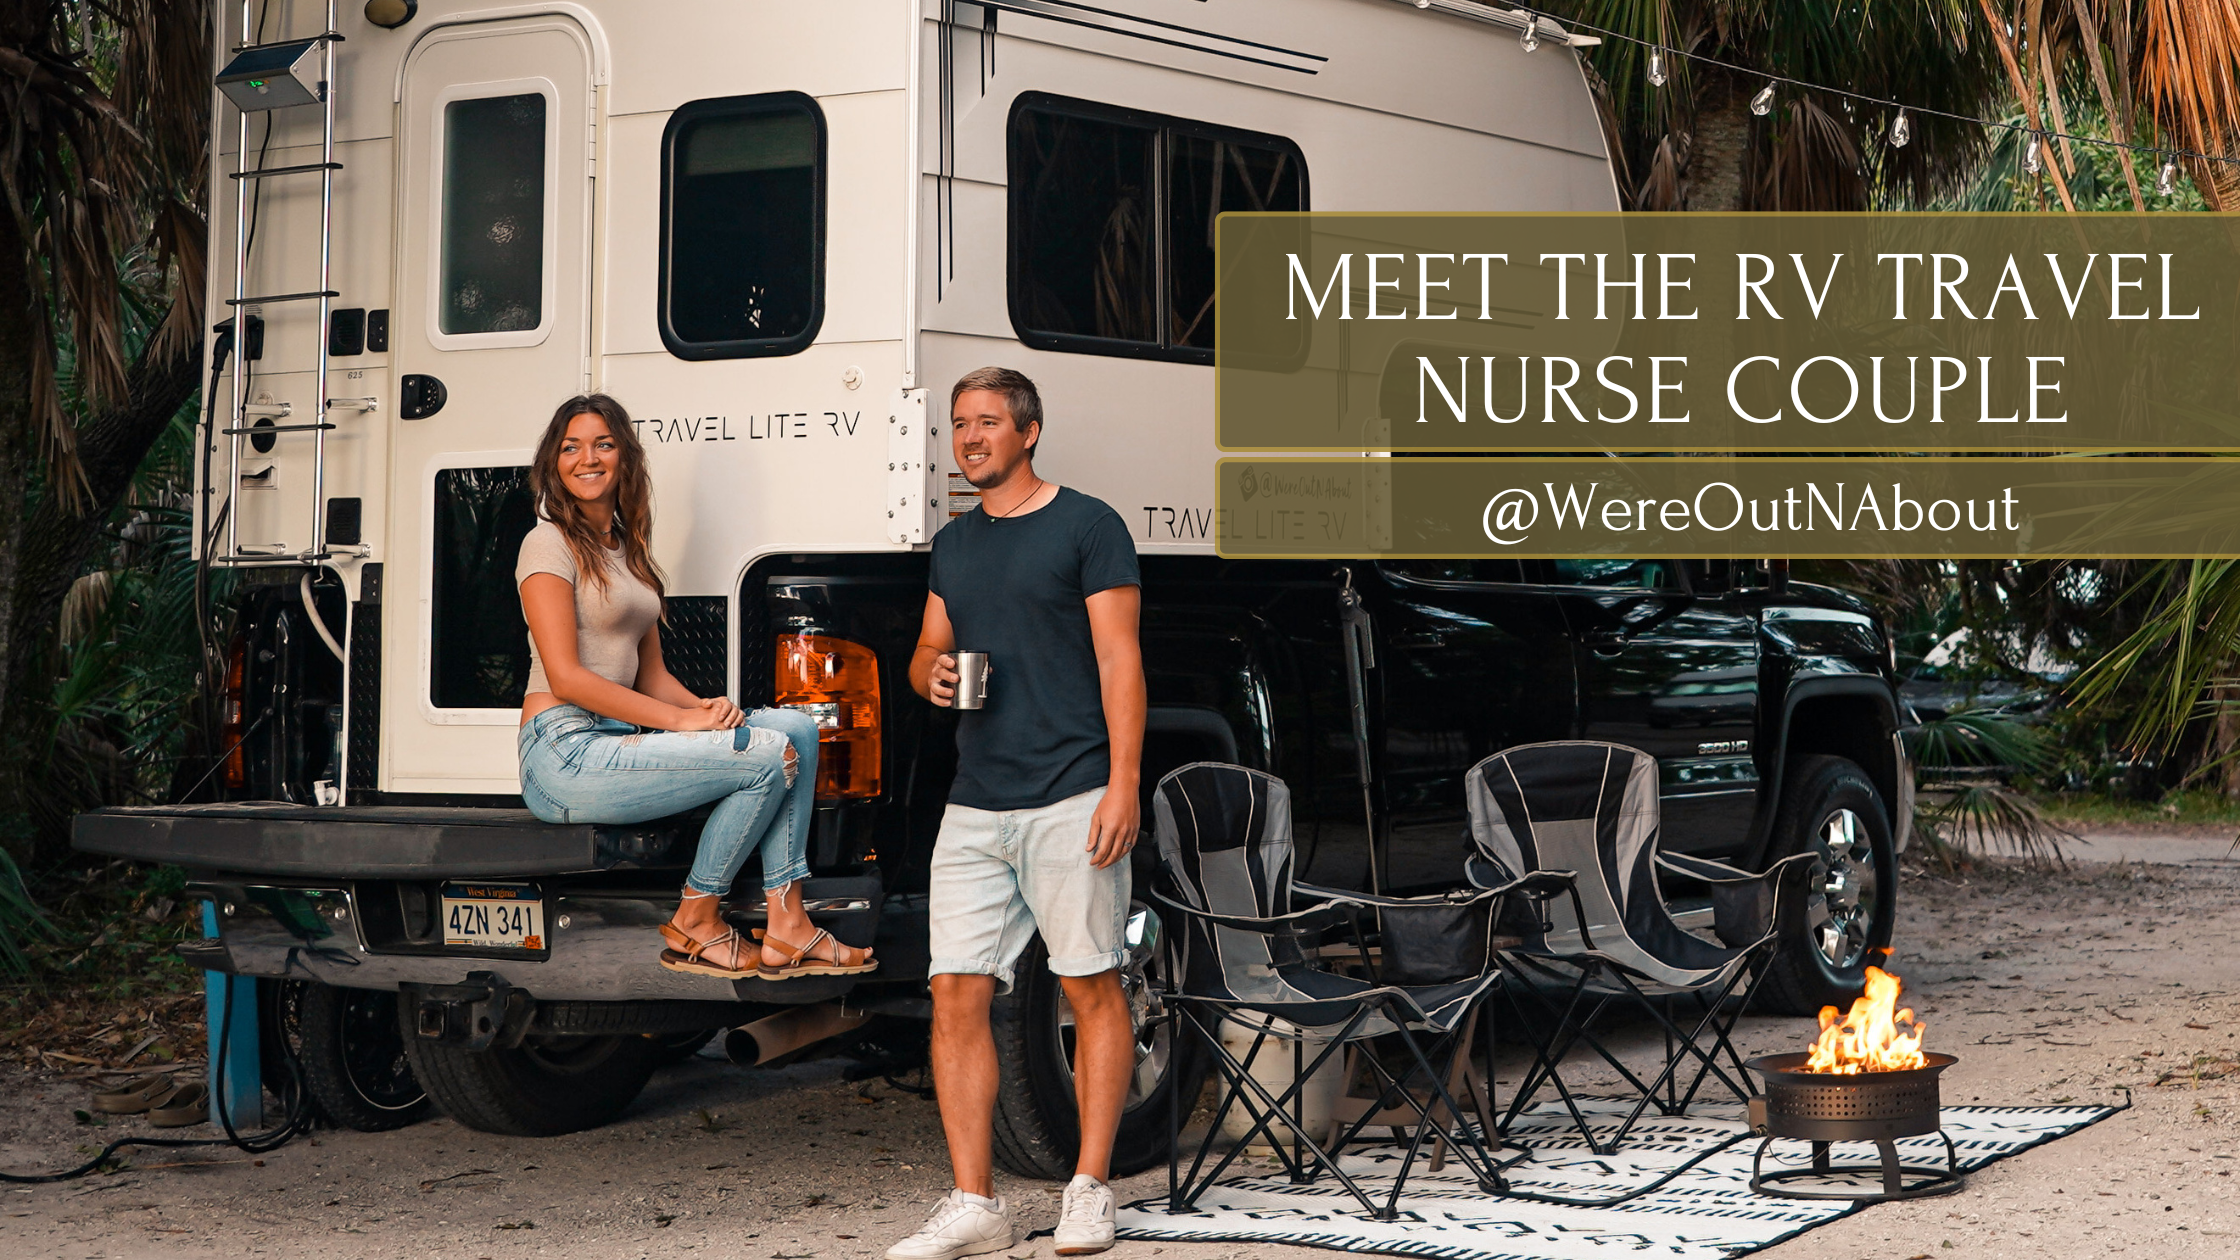 Meet the RV Travel Nurse Couple @WereOutNAbout